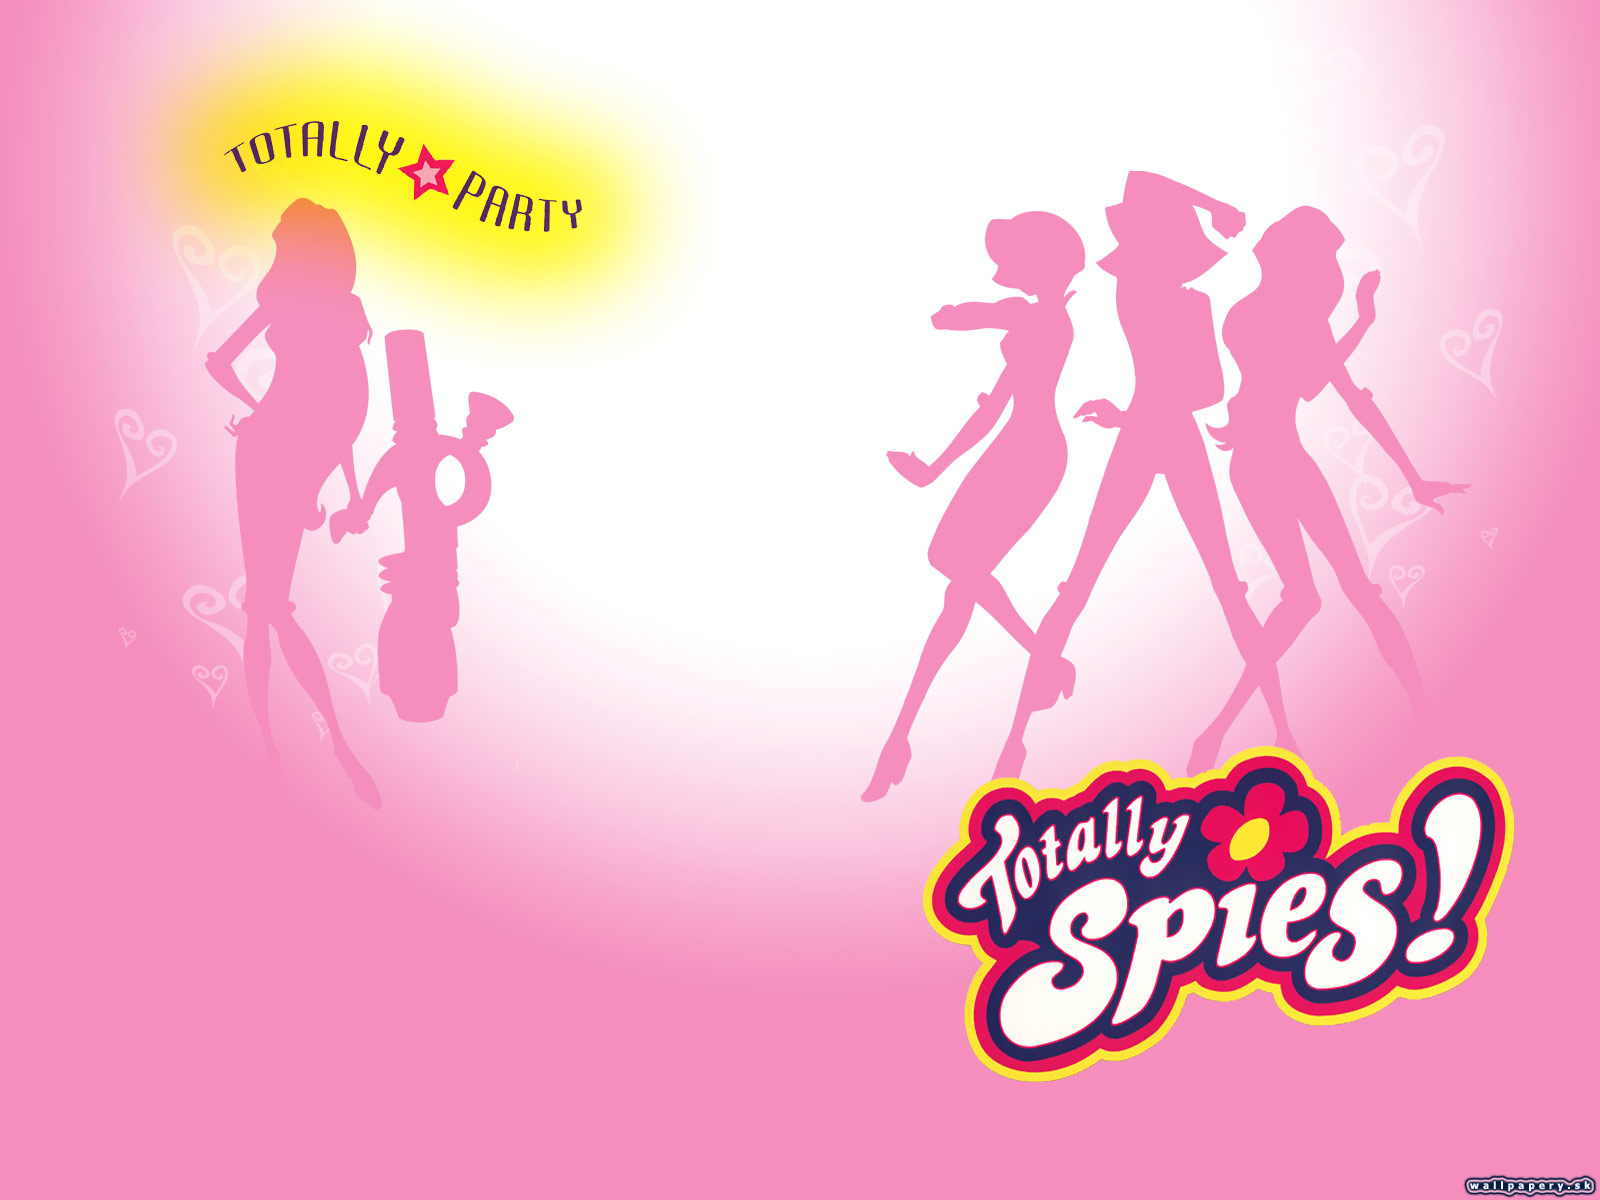 Totally Spies! Totally Party - wallpaper 2